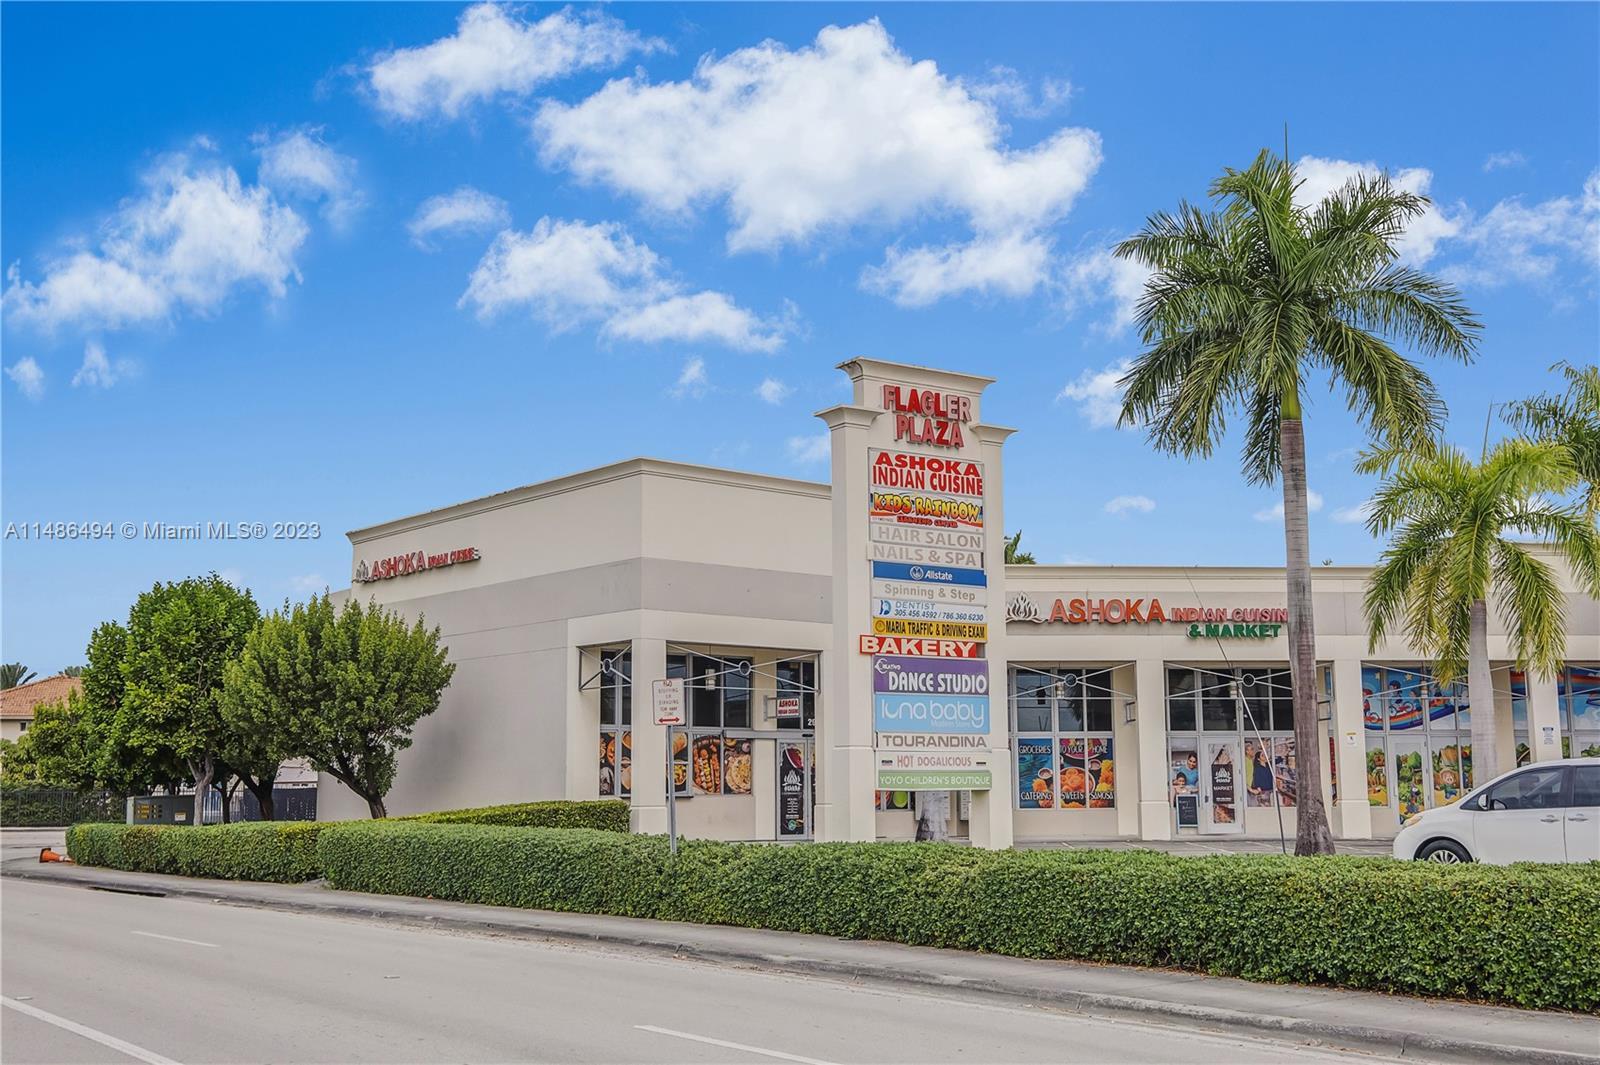 Photo of 275 NW 82 Ave in Miami, FL